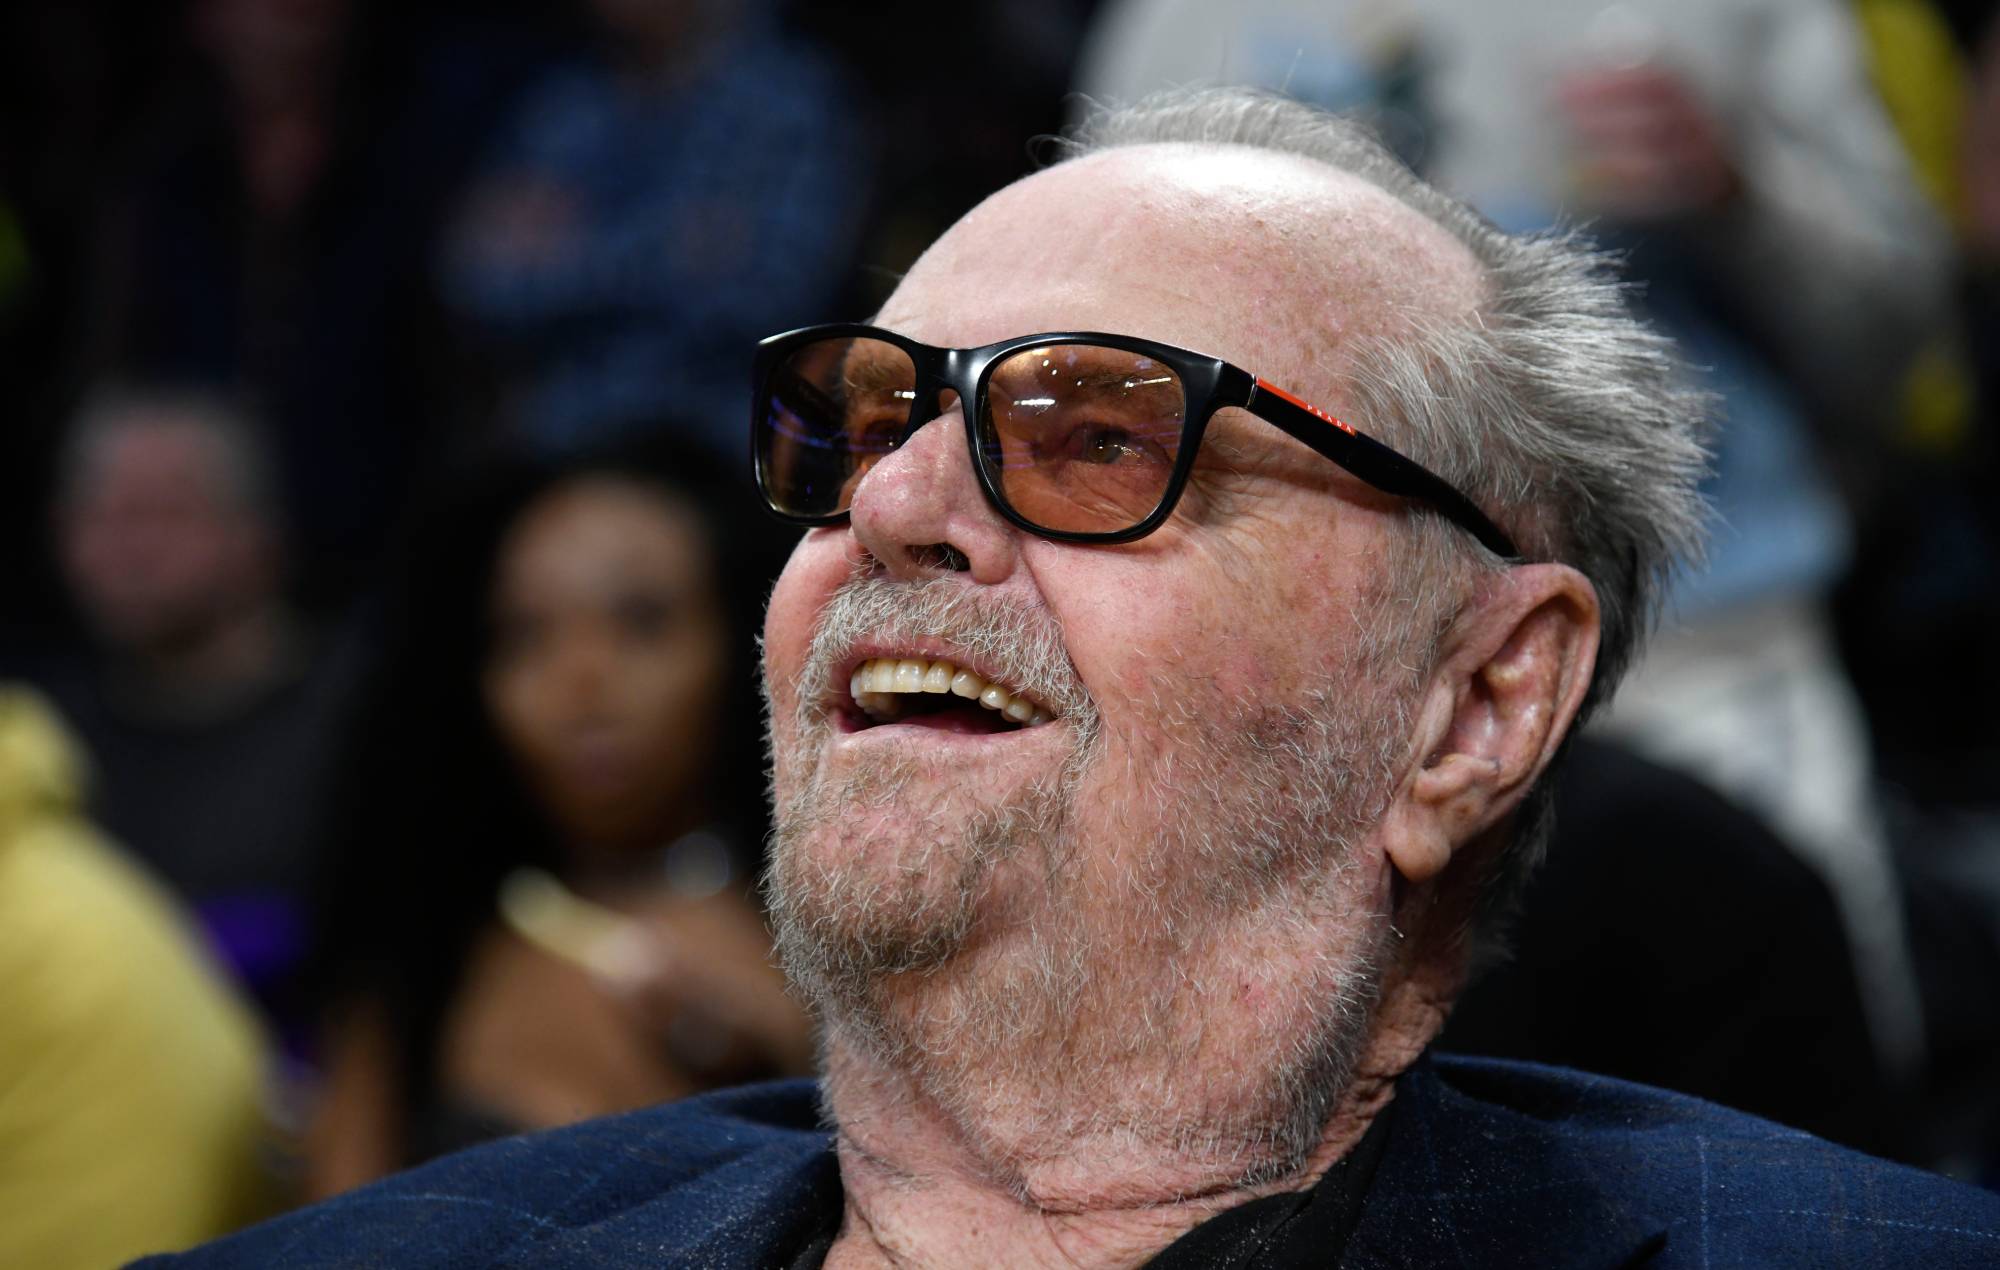 Jack Nicholson would rather “sit under a tree and read a book” than return to acting